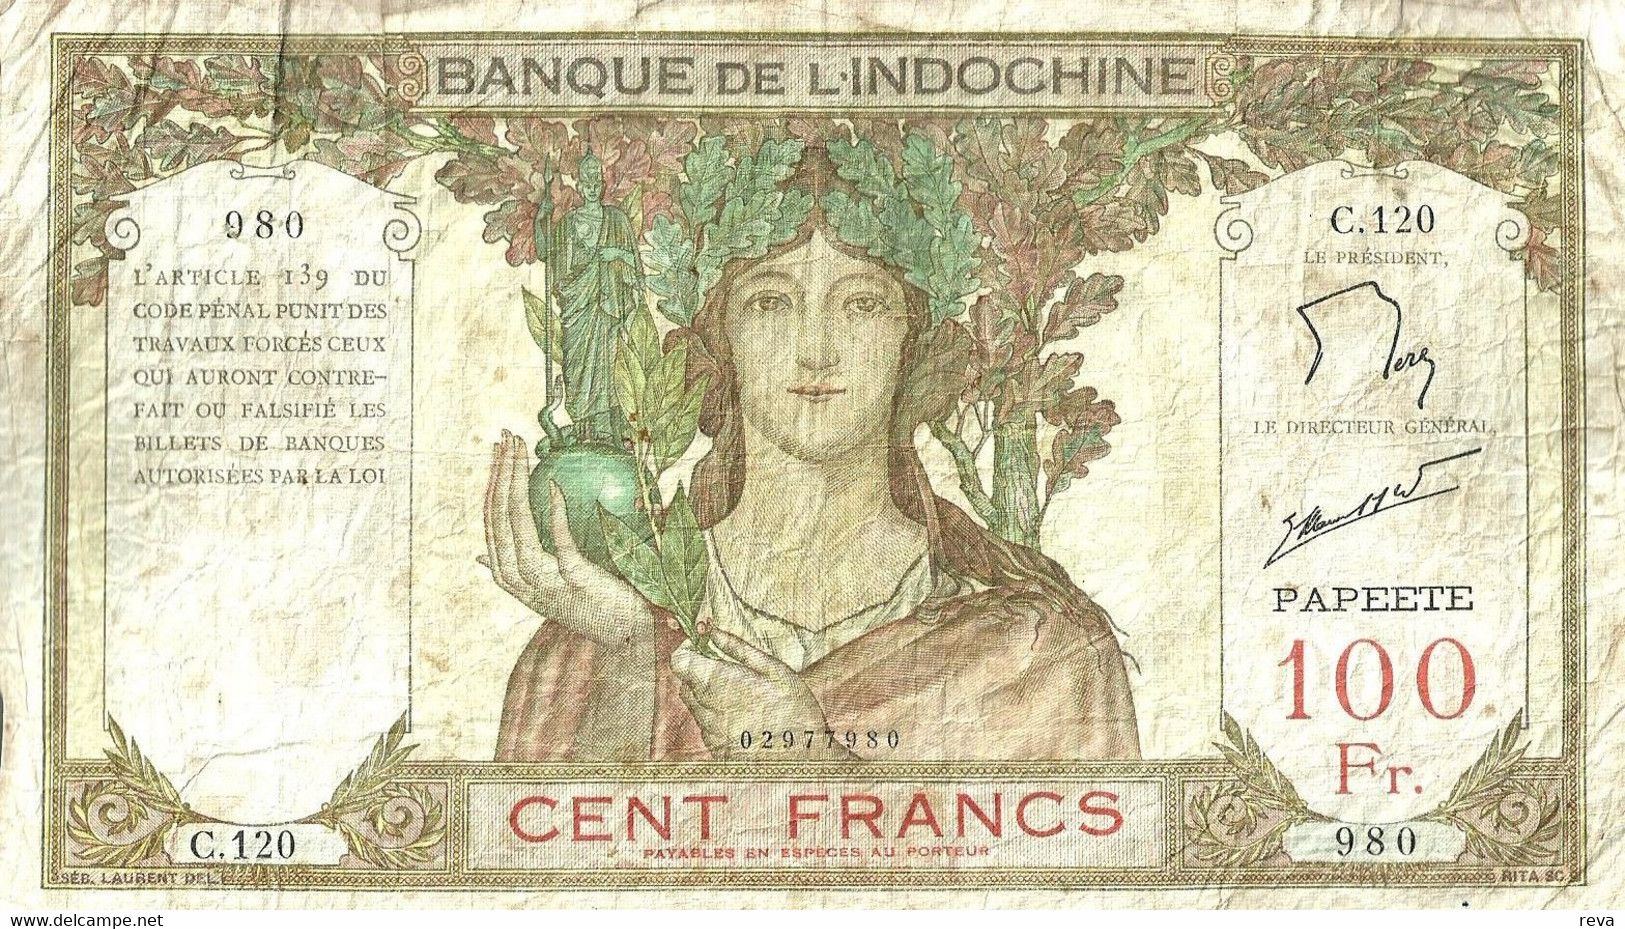 FRENCH POLYNESIA 100 FRANCS BROWN WOMAN HEAD FRONT STATUE BACK NOT DATED(1965) P14d 4th SIG VARIETY F READ DESCRIPTION!! - Papeete (Polinesia Francesa 1914-1985)